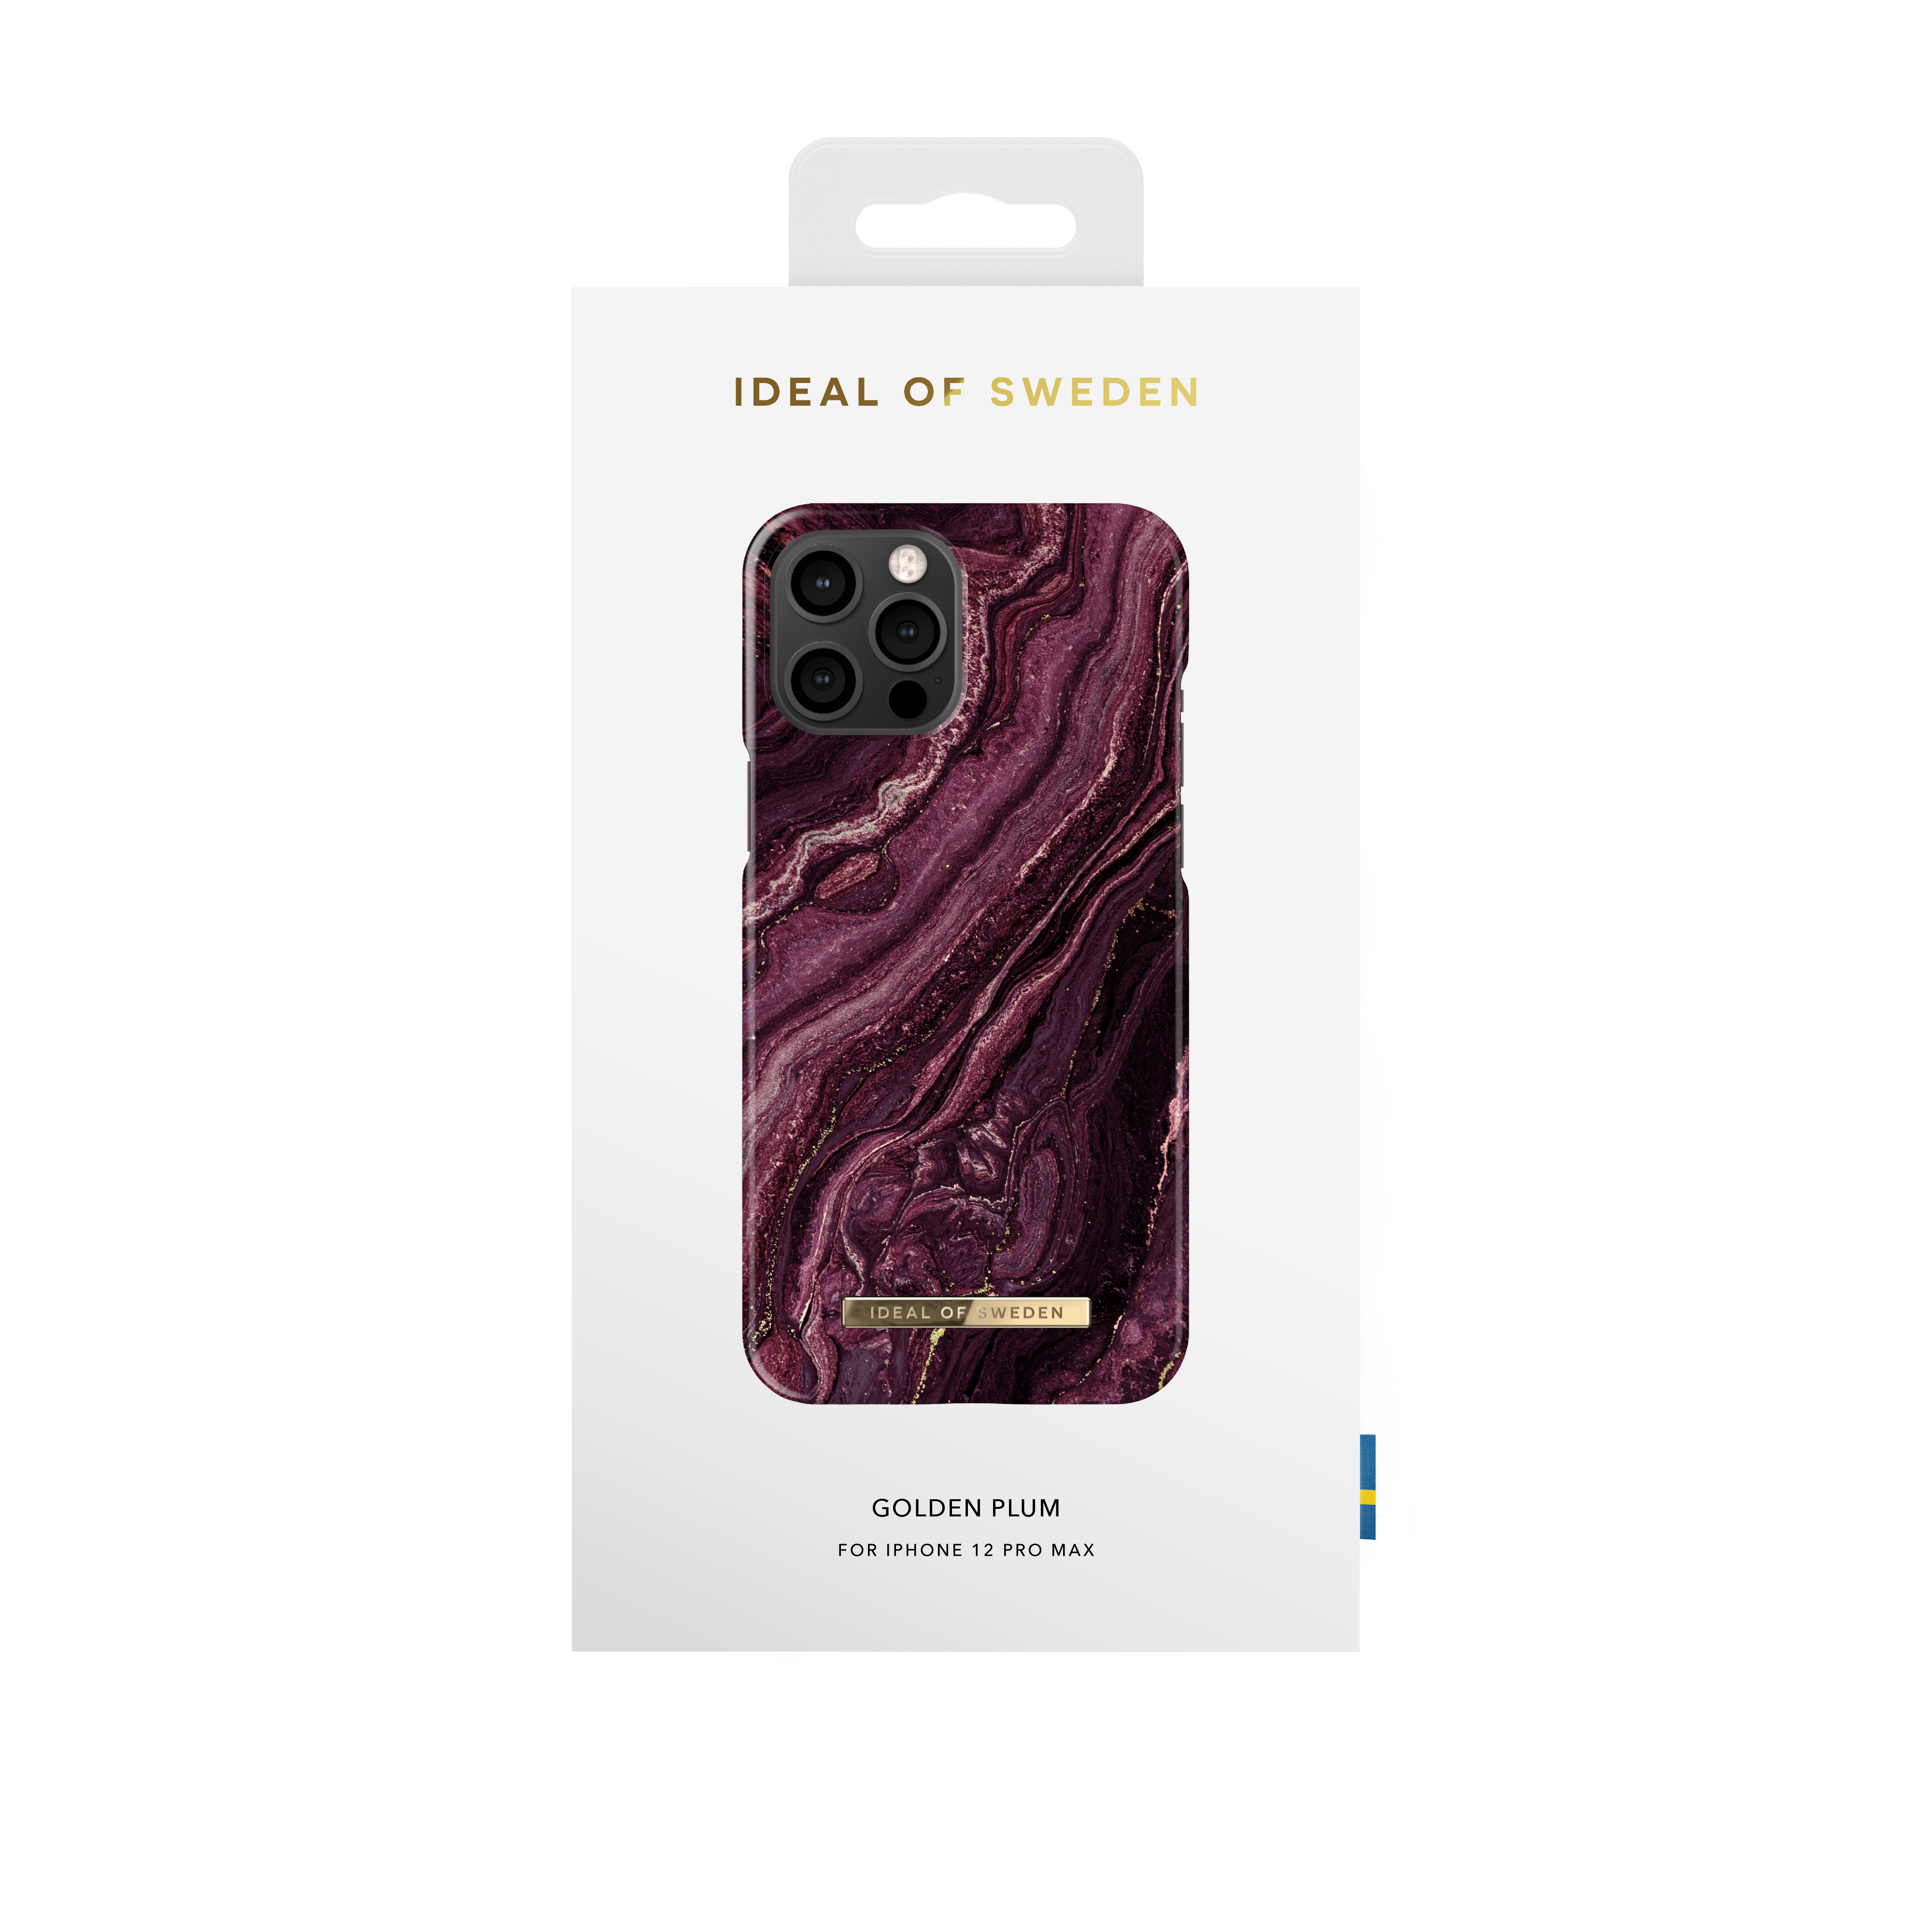 IDFCAW20-2067-232, OF Plum IPhone SWEDEN 12 IDEAL Backcover, Golden Apple, Pro Max,